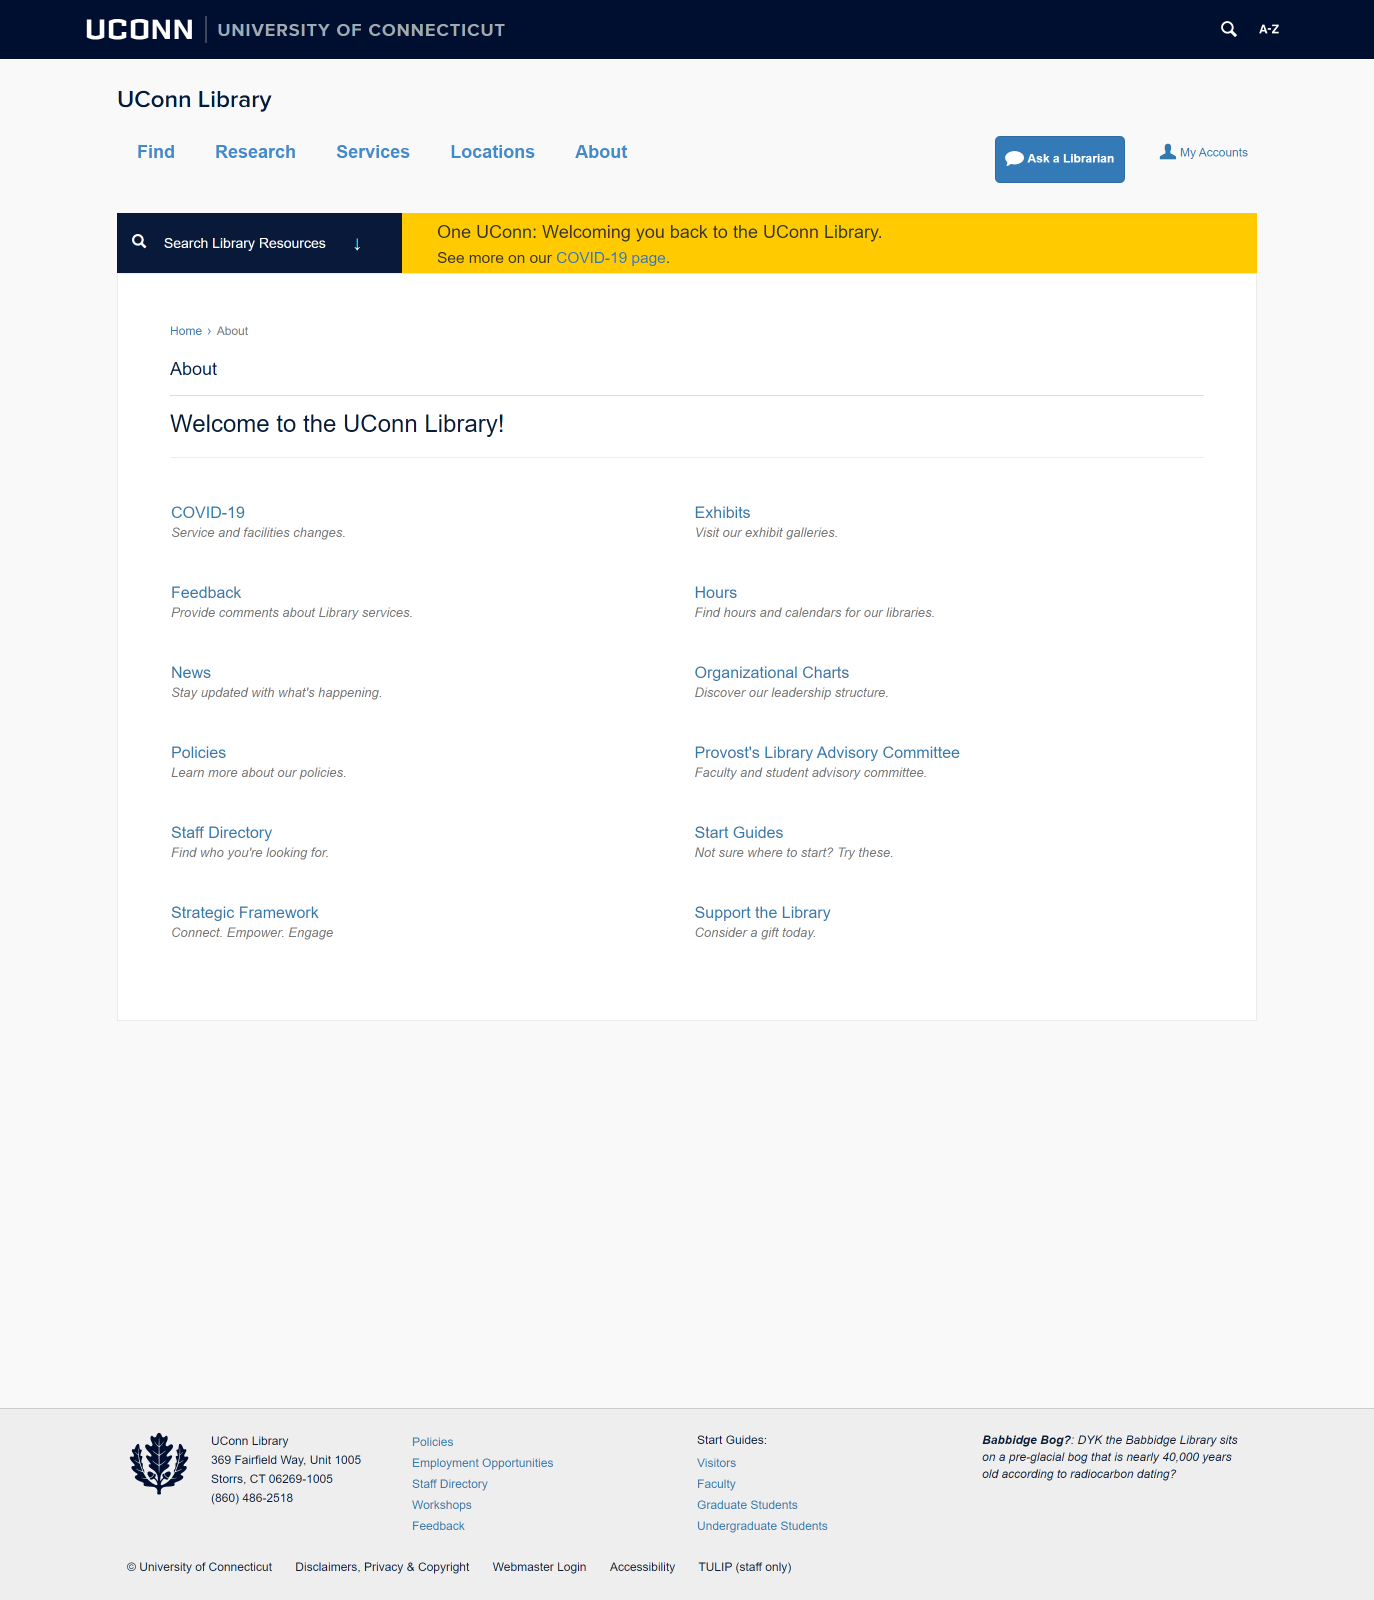 Screenshot of an interior page of the University Libraries website